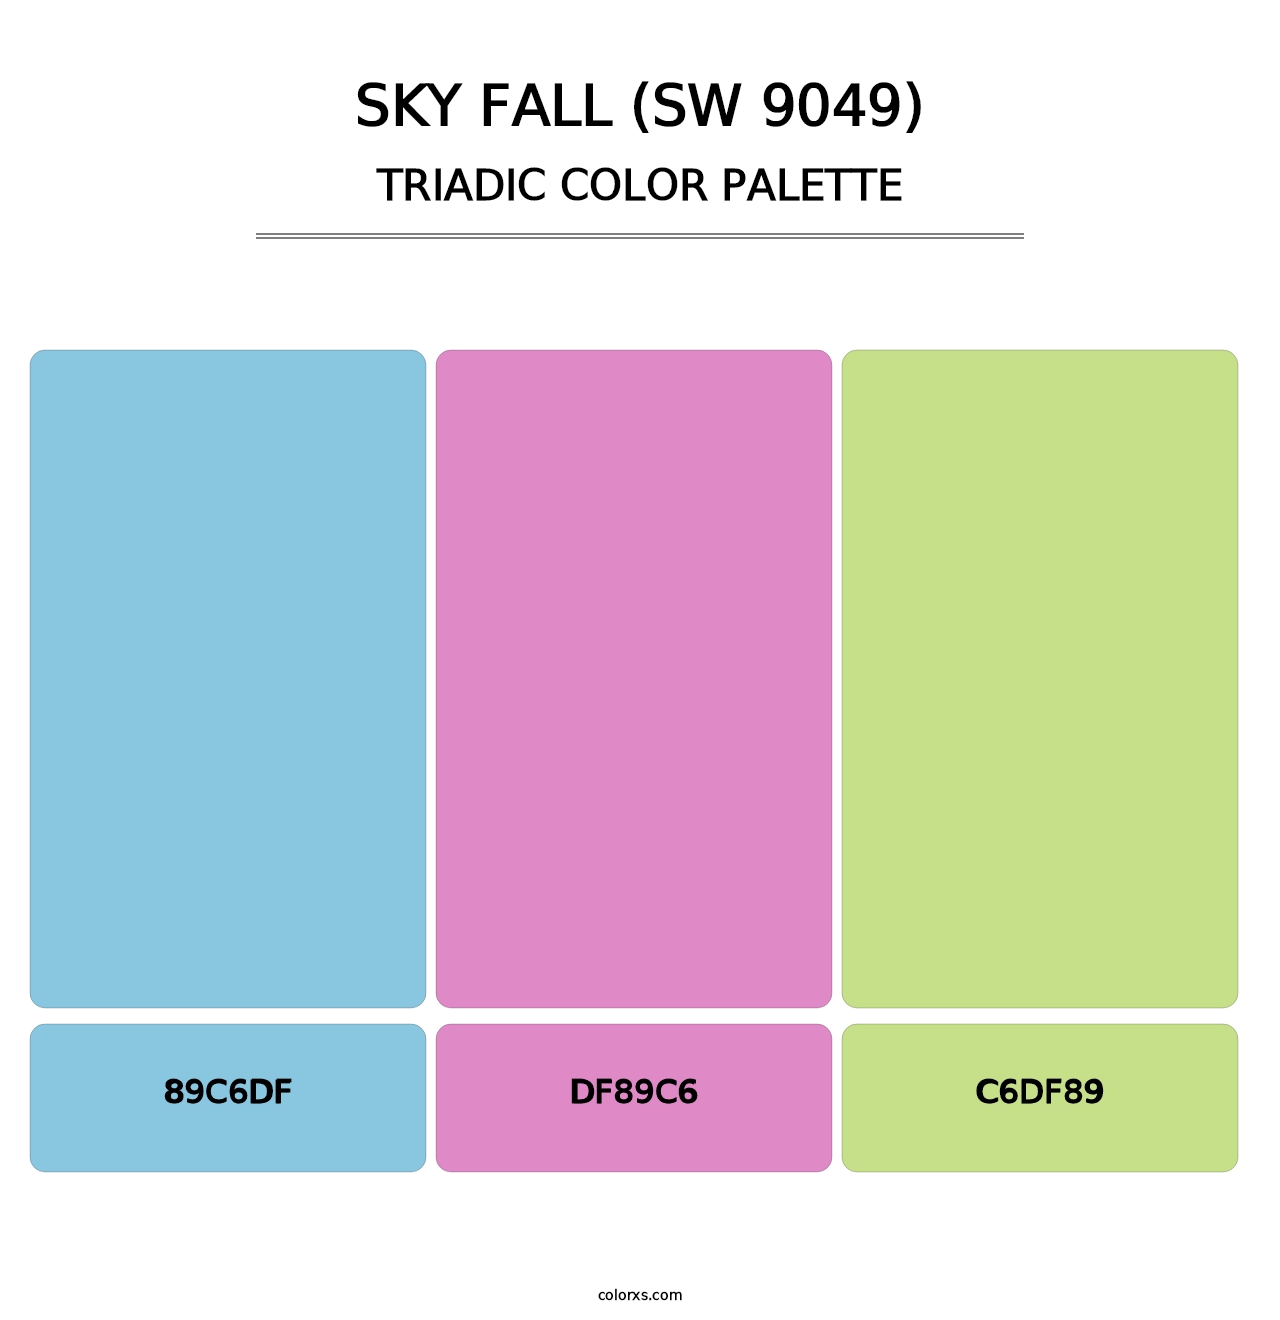 Sky Fall (SW 9049) - Triadic Color Palette